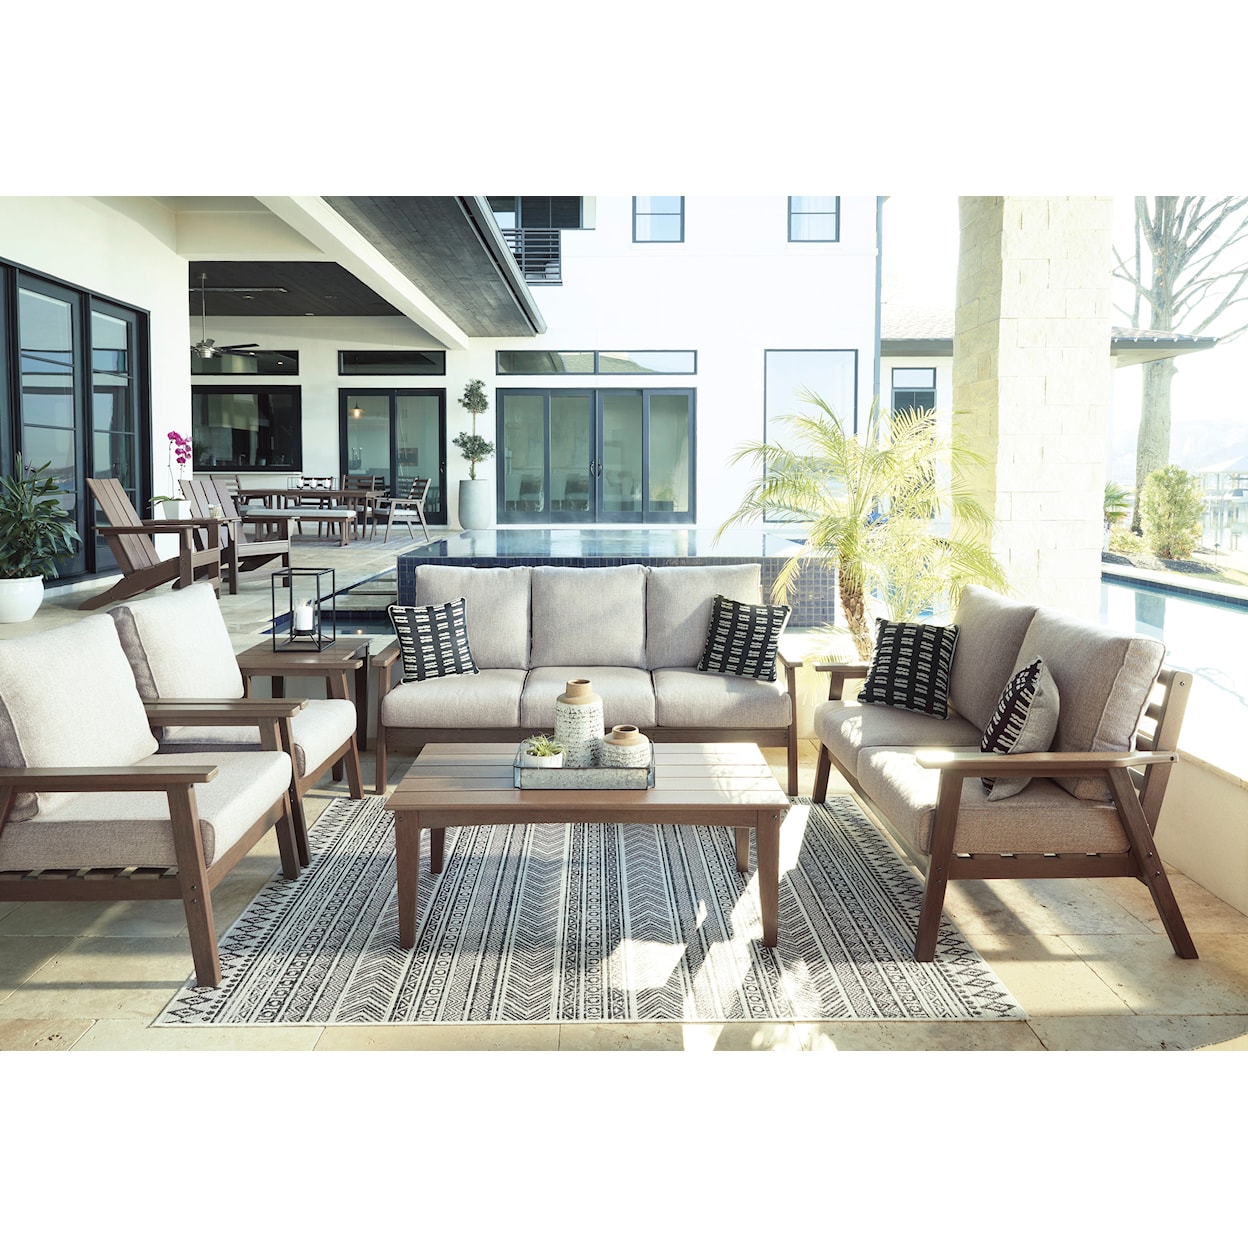 Signature Design by Ashley Emmeline Outdoor Loveseat with Cushion